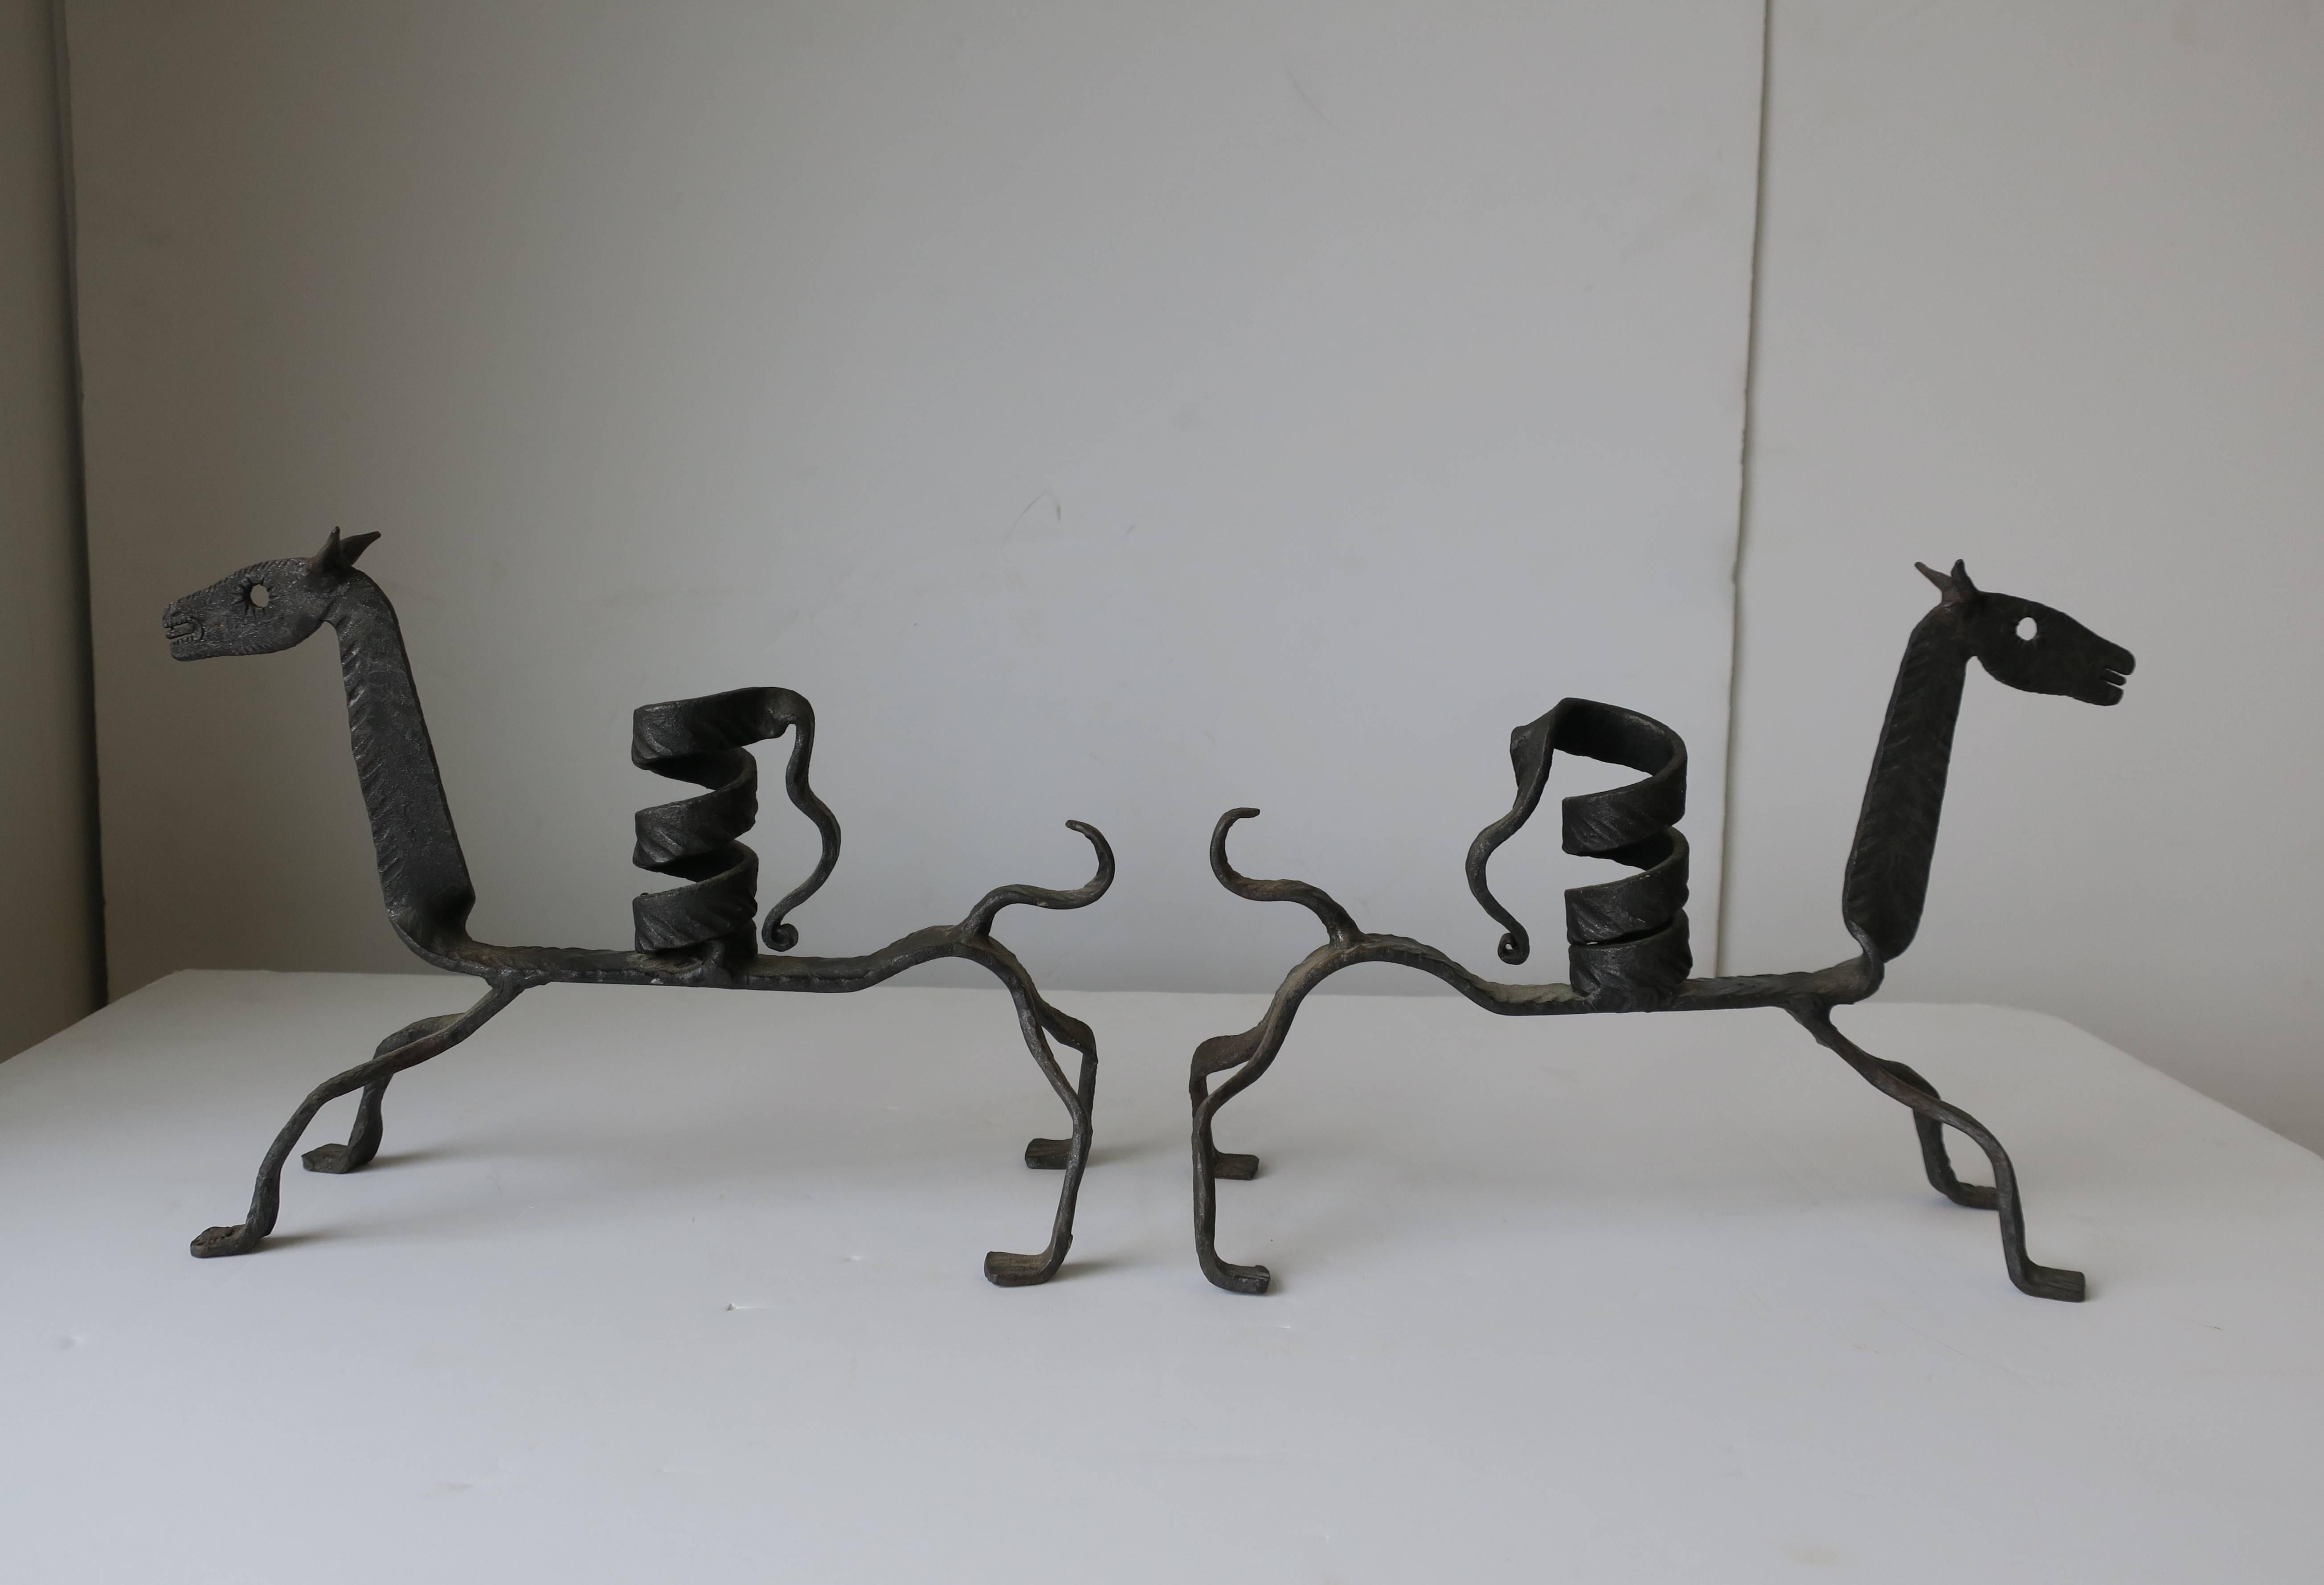 A beautiful pair of Spanish iron metal horse sculptures, decorative objects, and candlestick holders. Made in Spain (marked on hoof as show in image #8.) Dimensions: 10.5